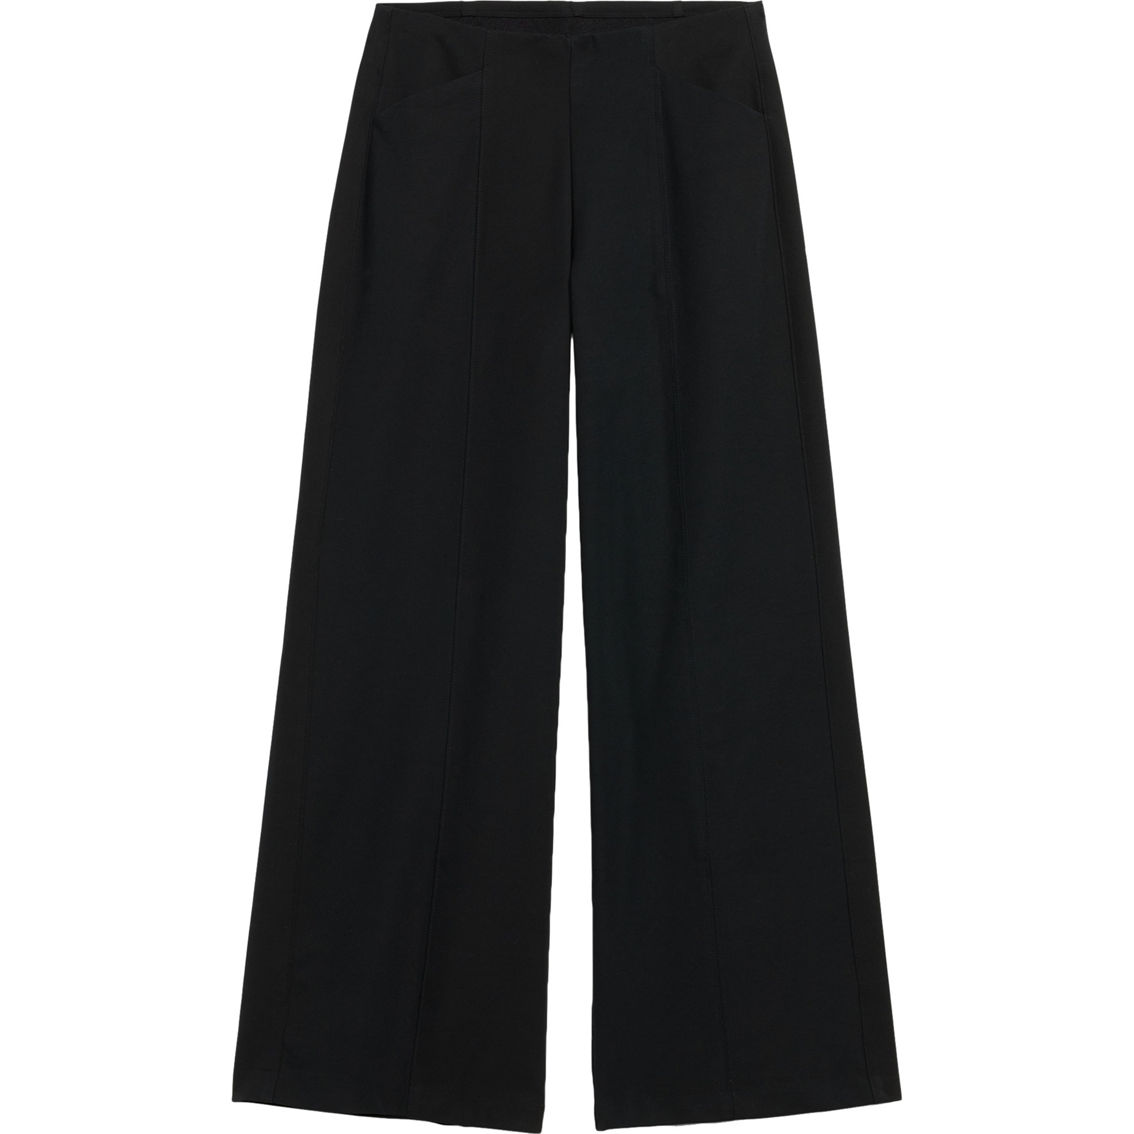 Old Navy High Rise Stretch Wide Leg Pants | Pants | Clothing ...